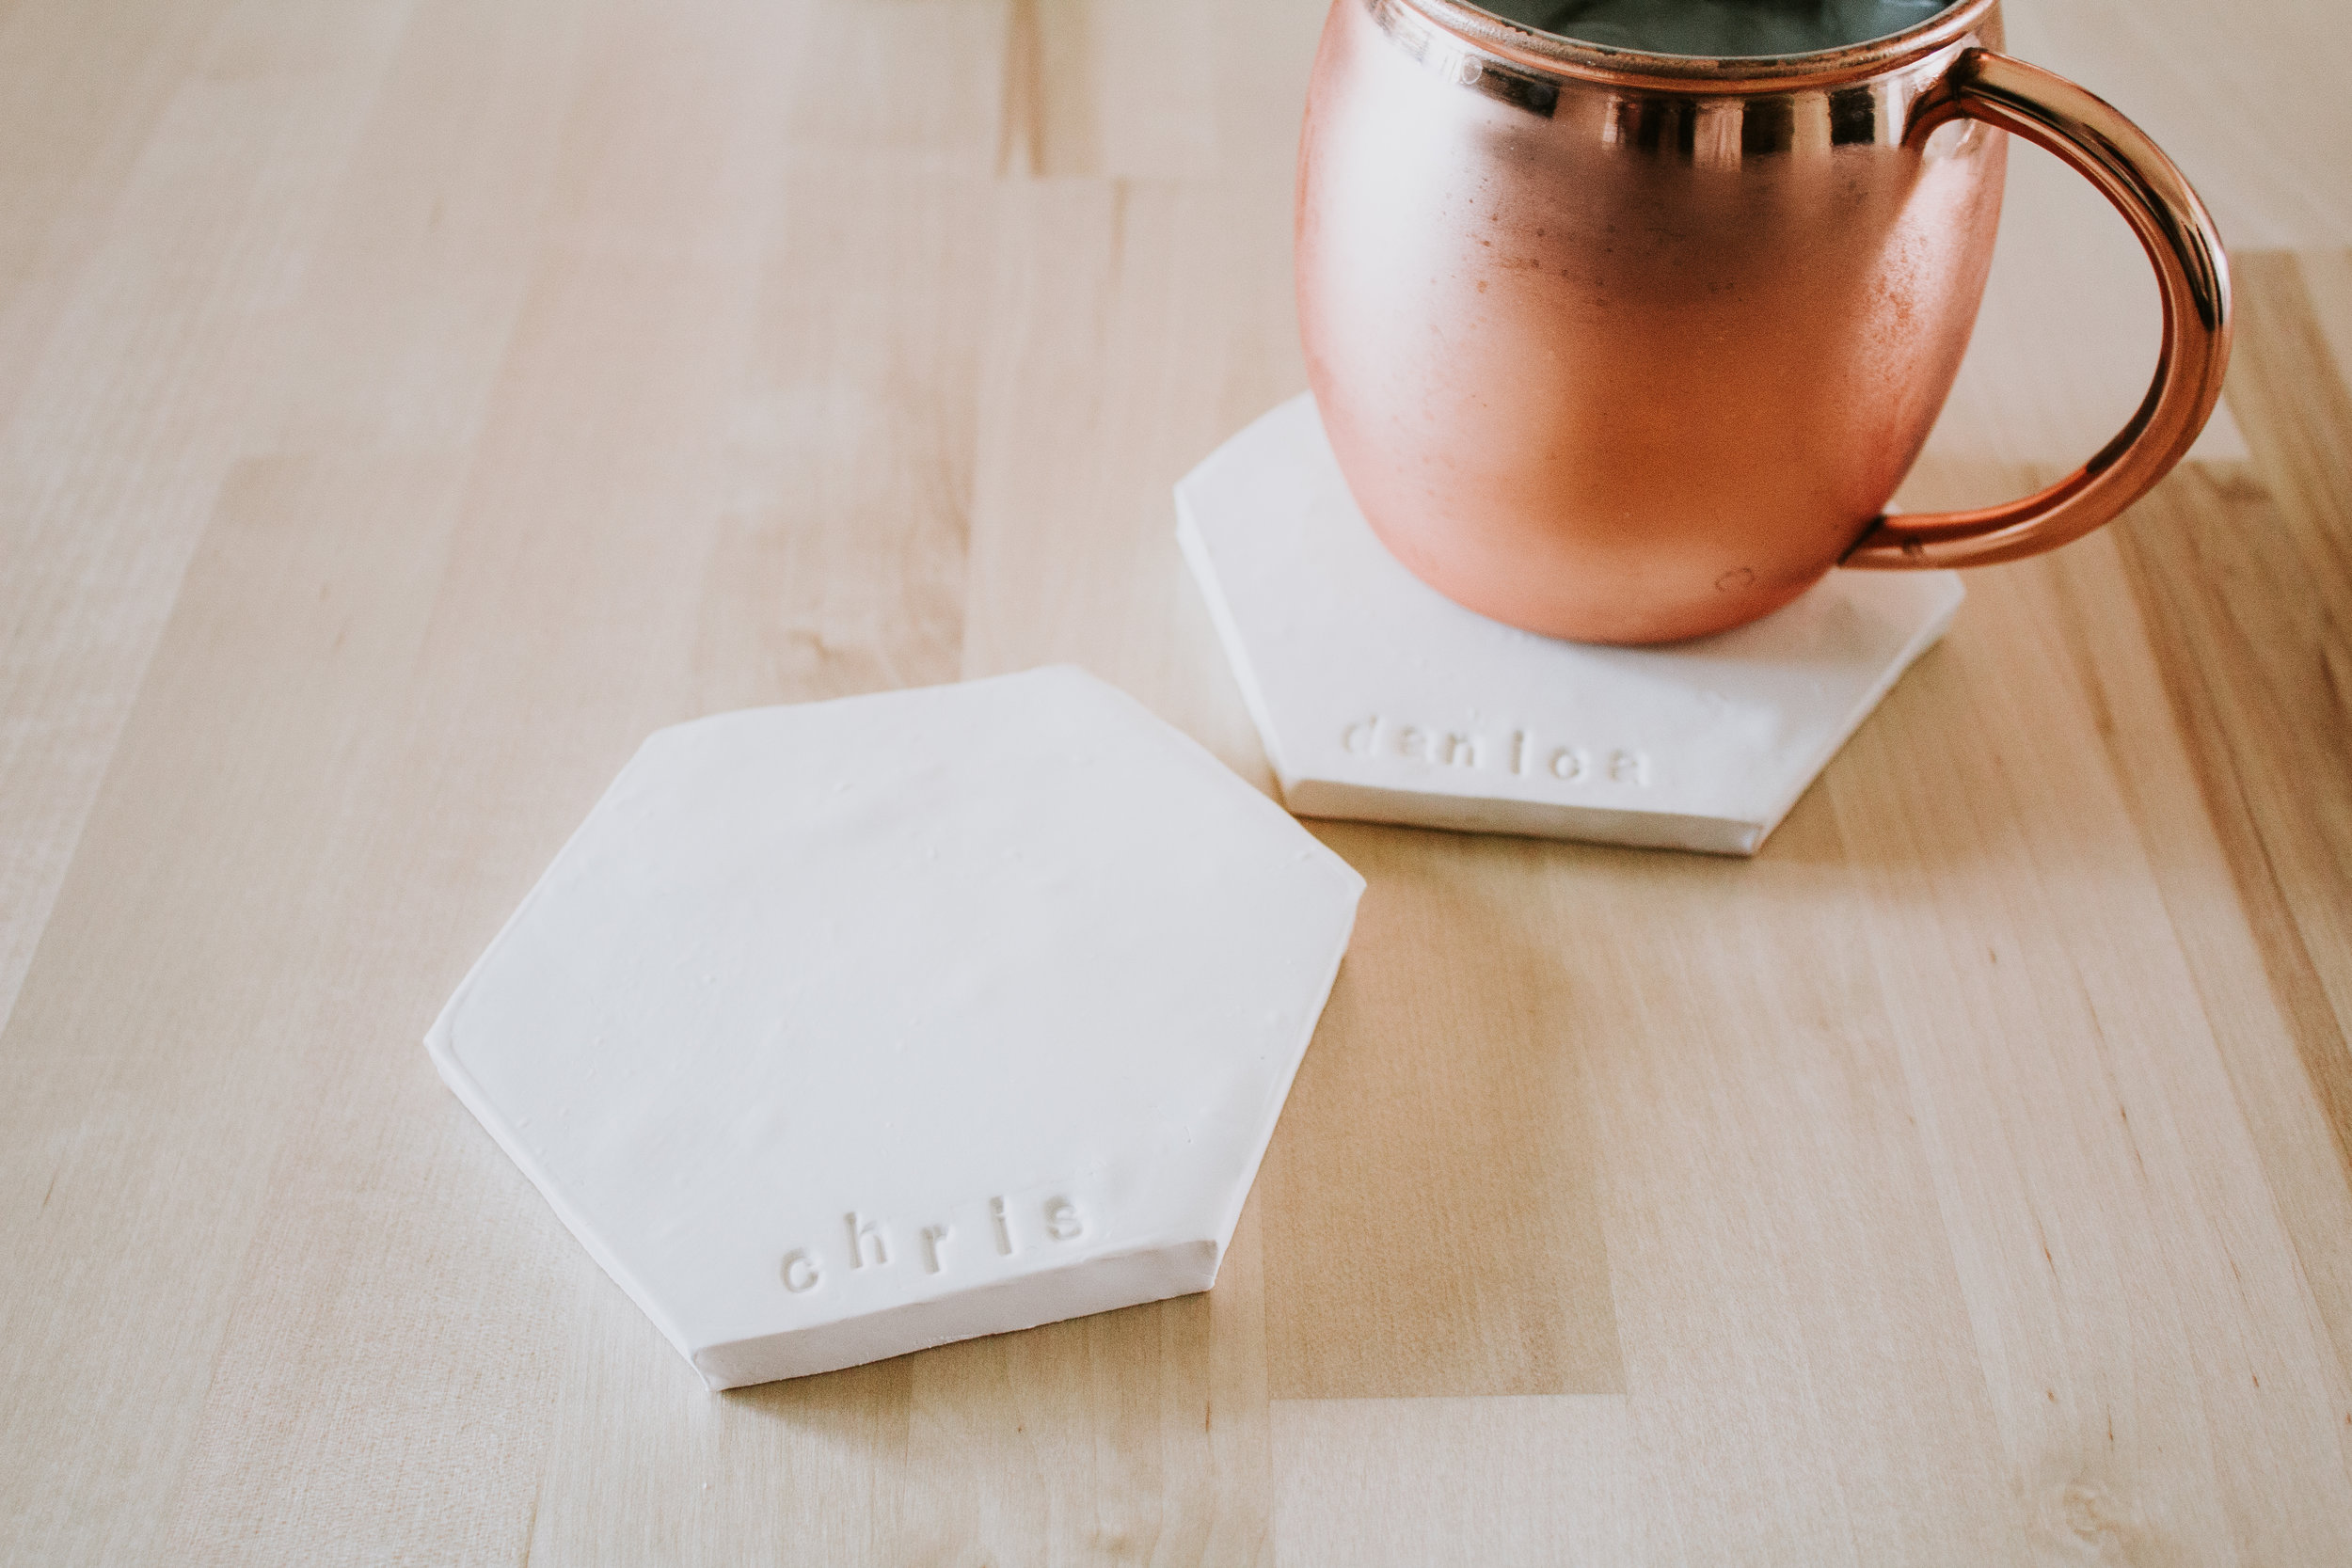 DIY Clay Coasters by Refined Design - personalized clay coasters you can make from home! Perfect craft project and gift idea for weddings, Christmas, and birthdays.